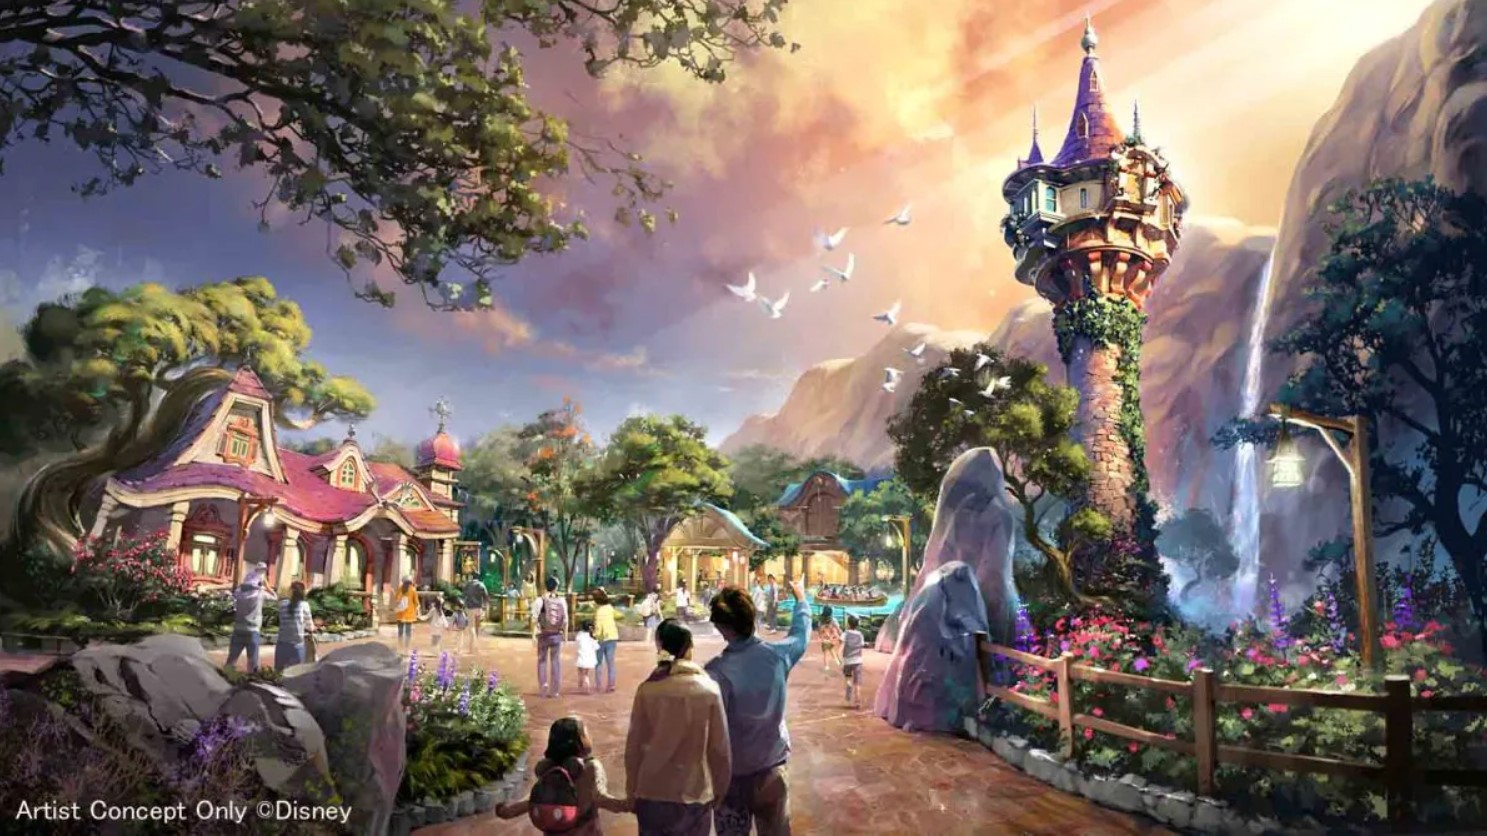 Tokyo's ambitious new theme park land may show the future of Disney parks |  Arts Stories + Interviews | Orlando | Orlando Weekly